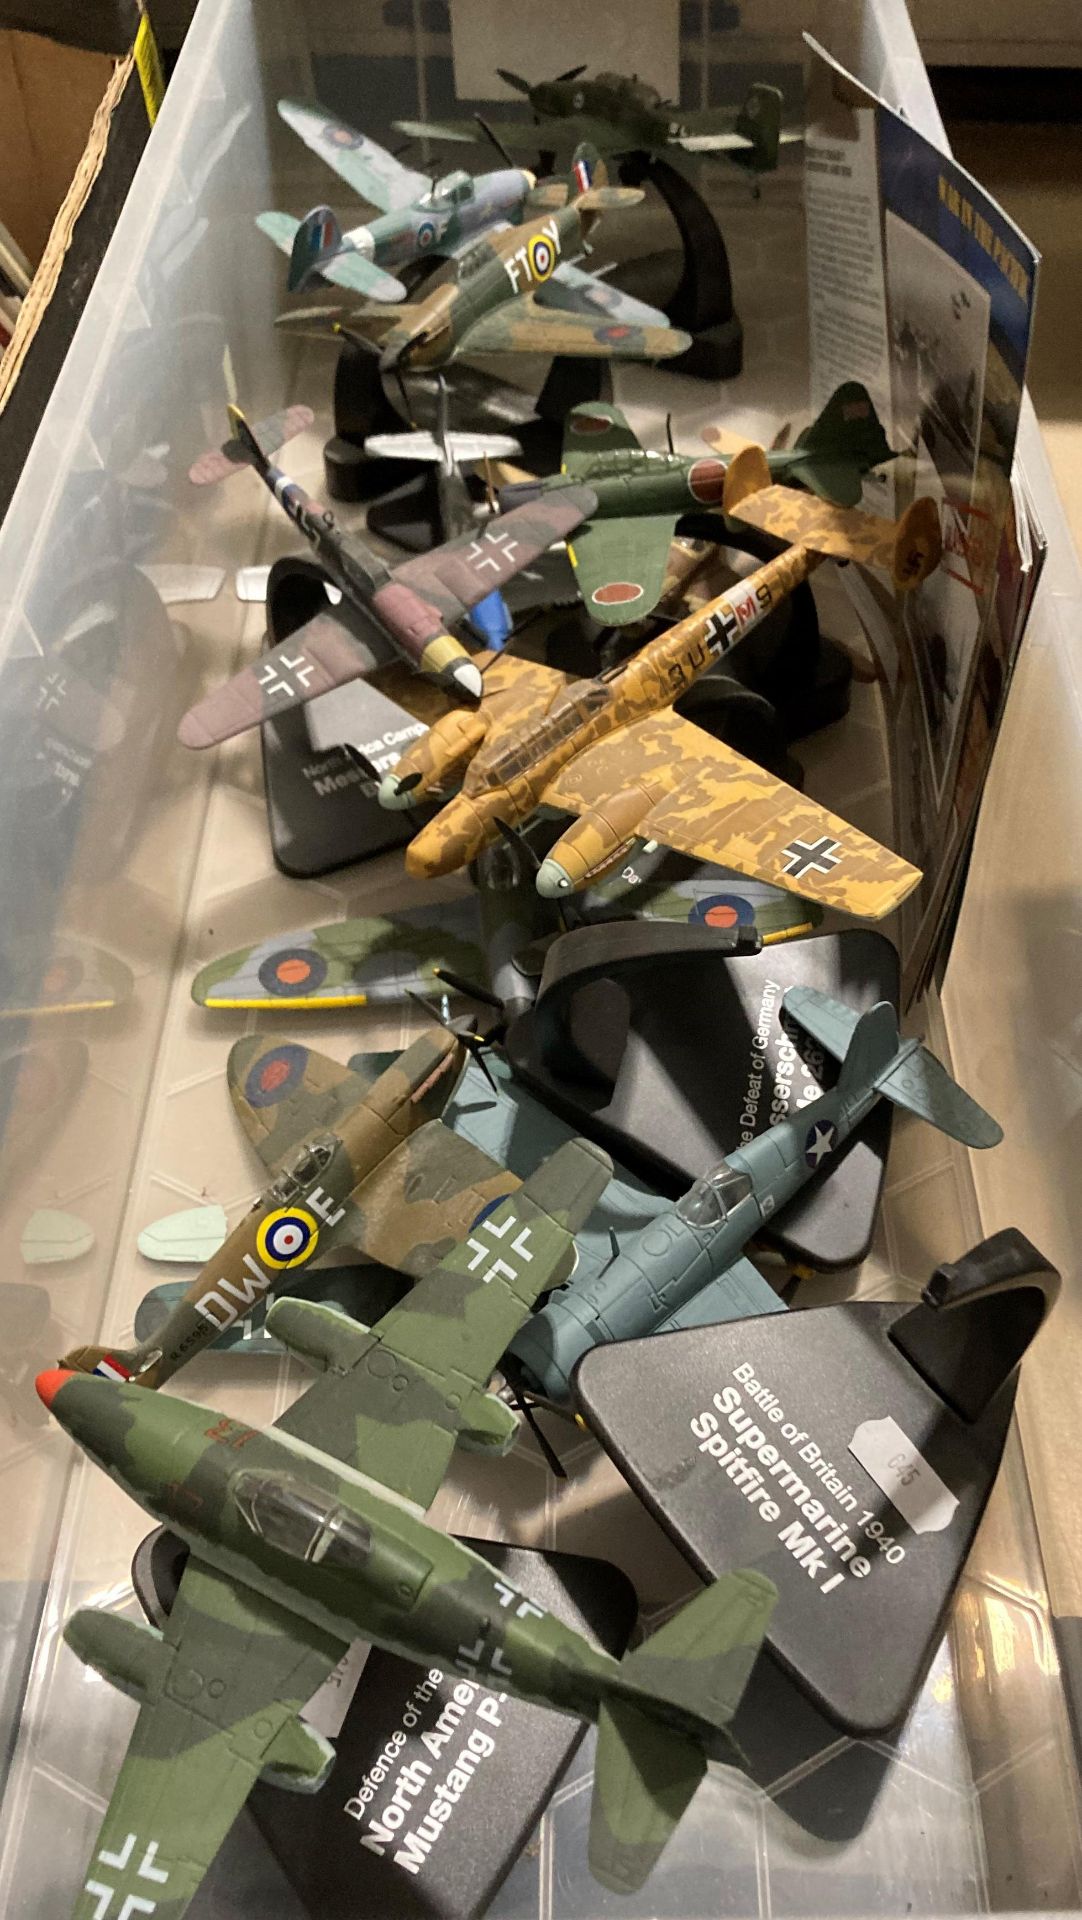 Contents to plastic box - thirteen Atlas Editions scale model Second World War fighter planes and